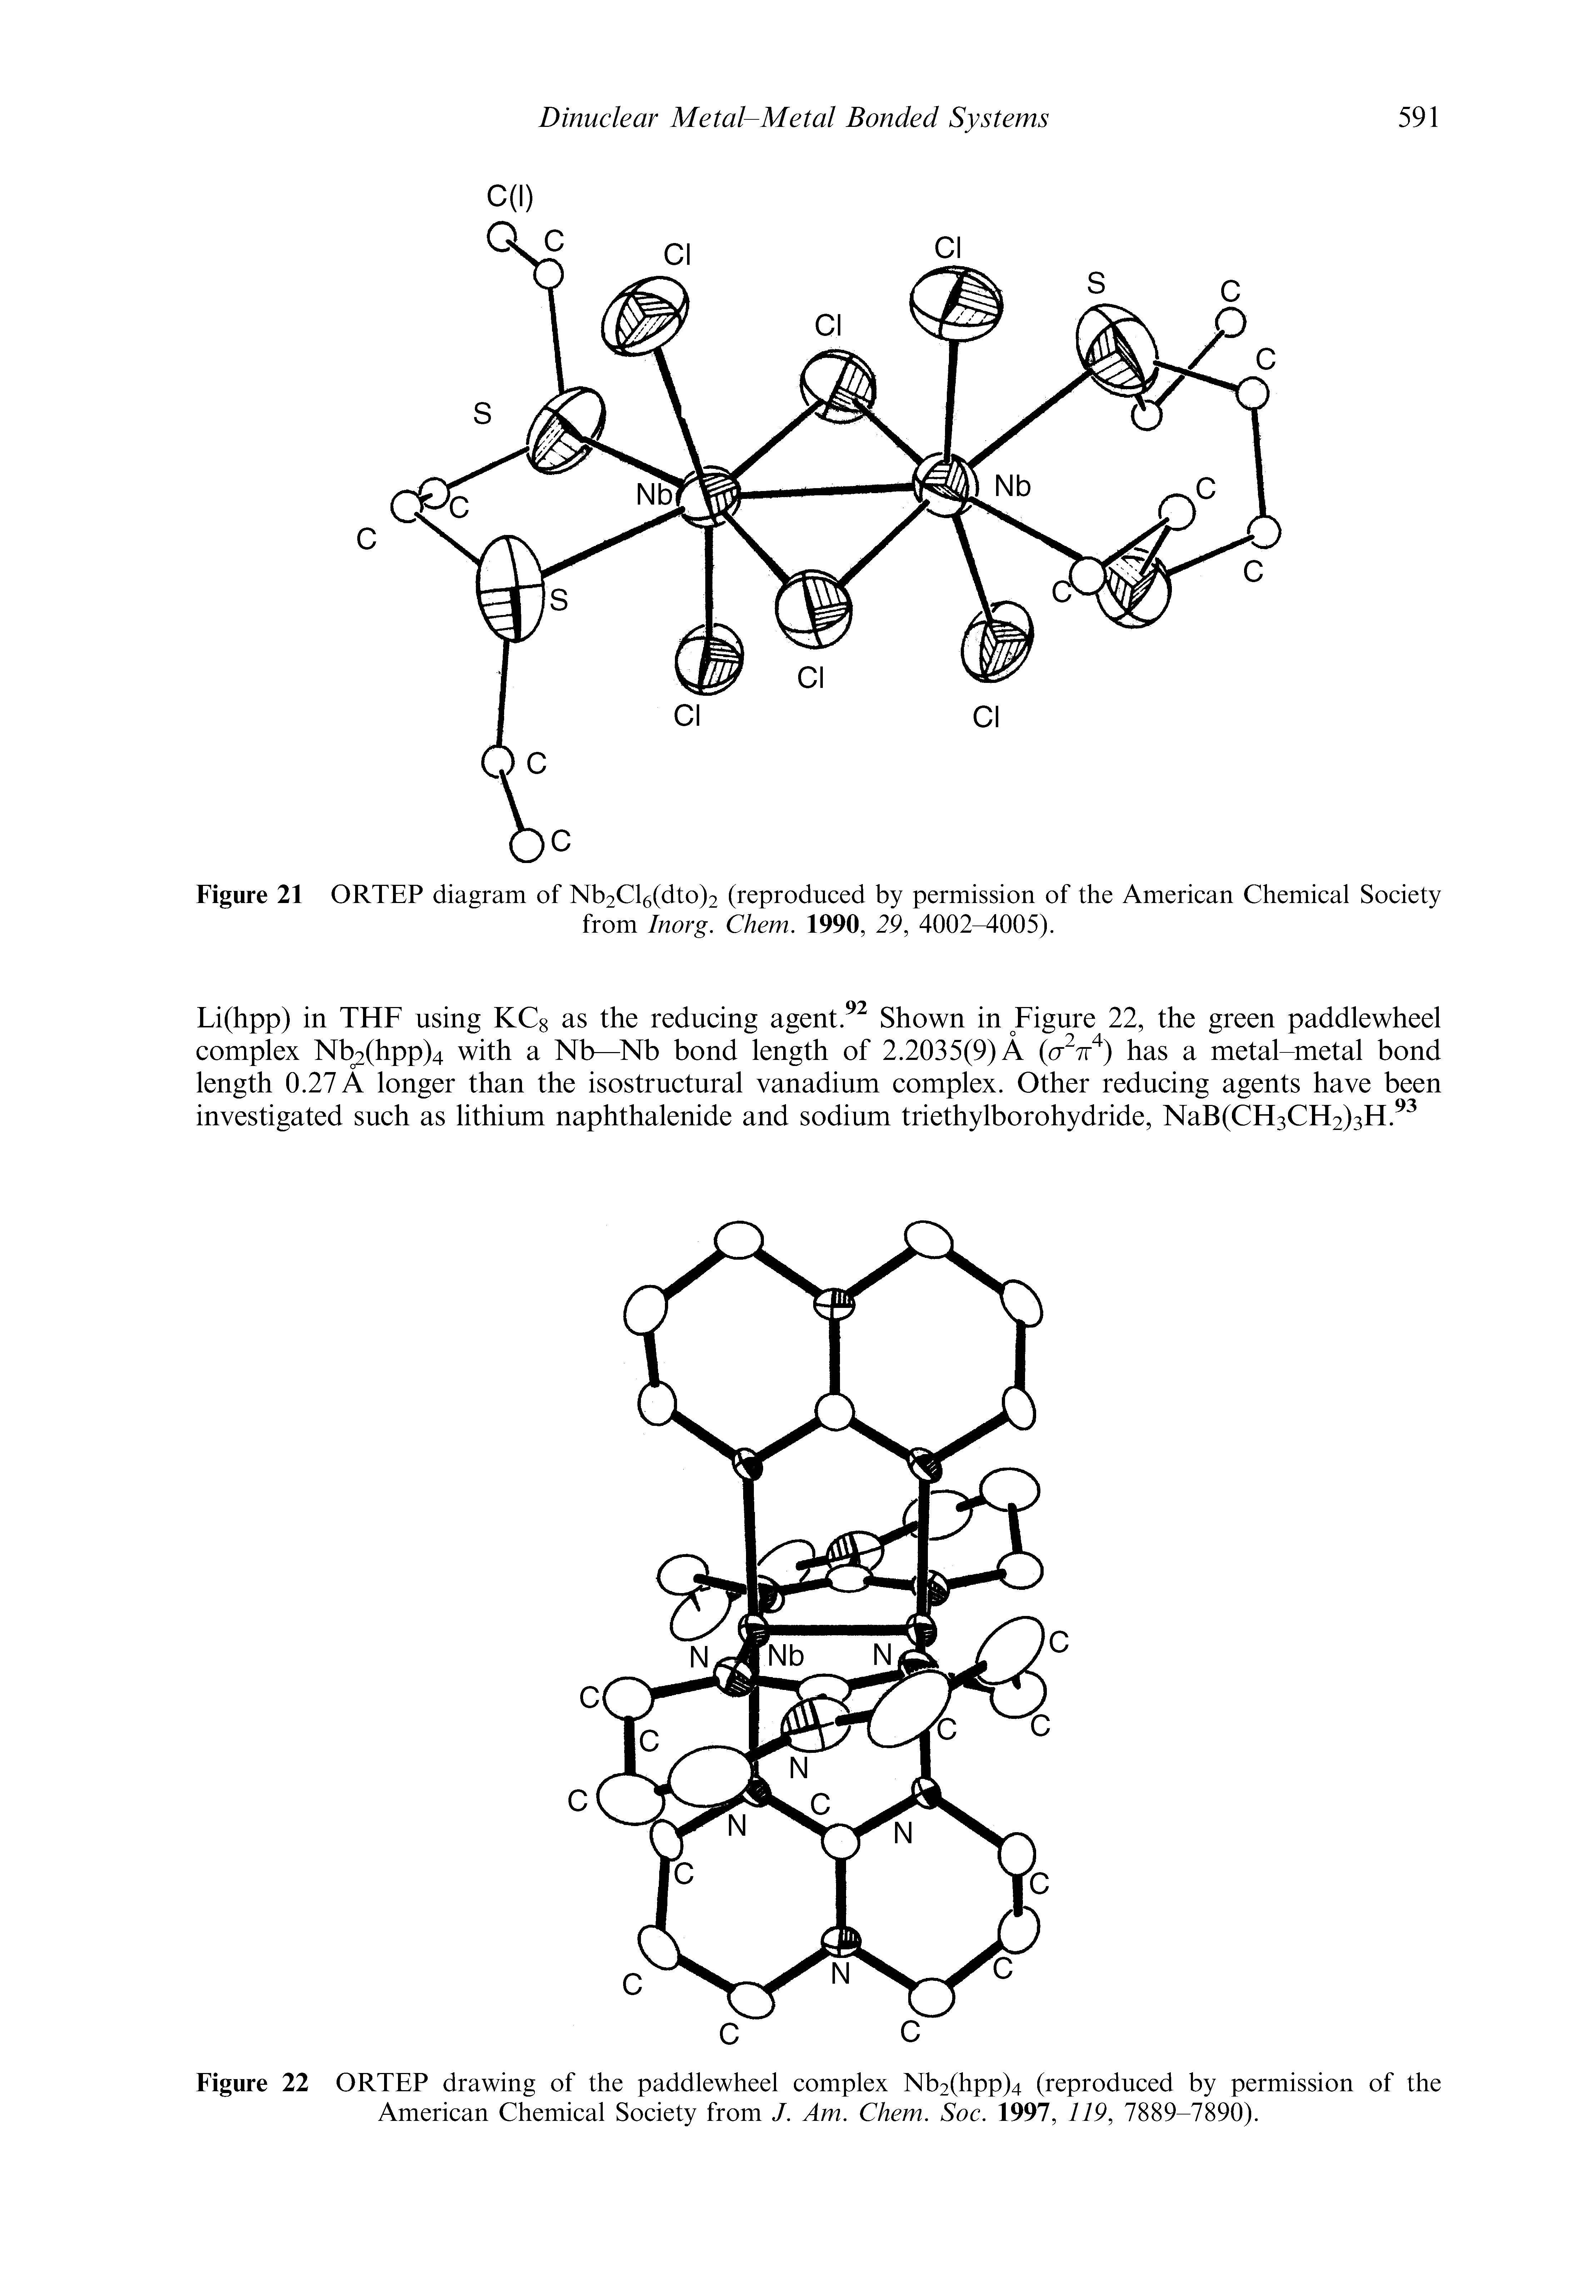 Figure 22 ORTEP drawing of the paddlewheel complex Nb2(hpp)4 (reproduced by permission of the American Chemical Society from J. Am. Chem. Soc. 1997, 119, 7889-7890).